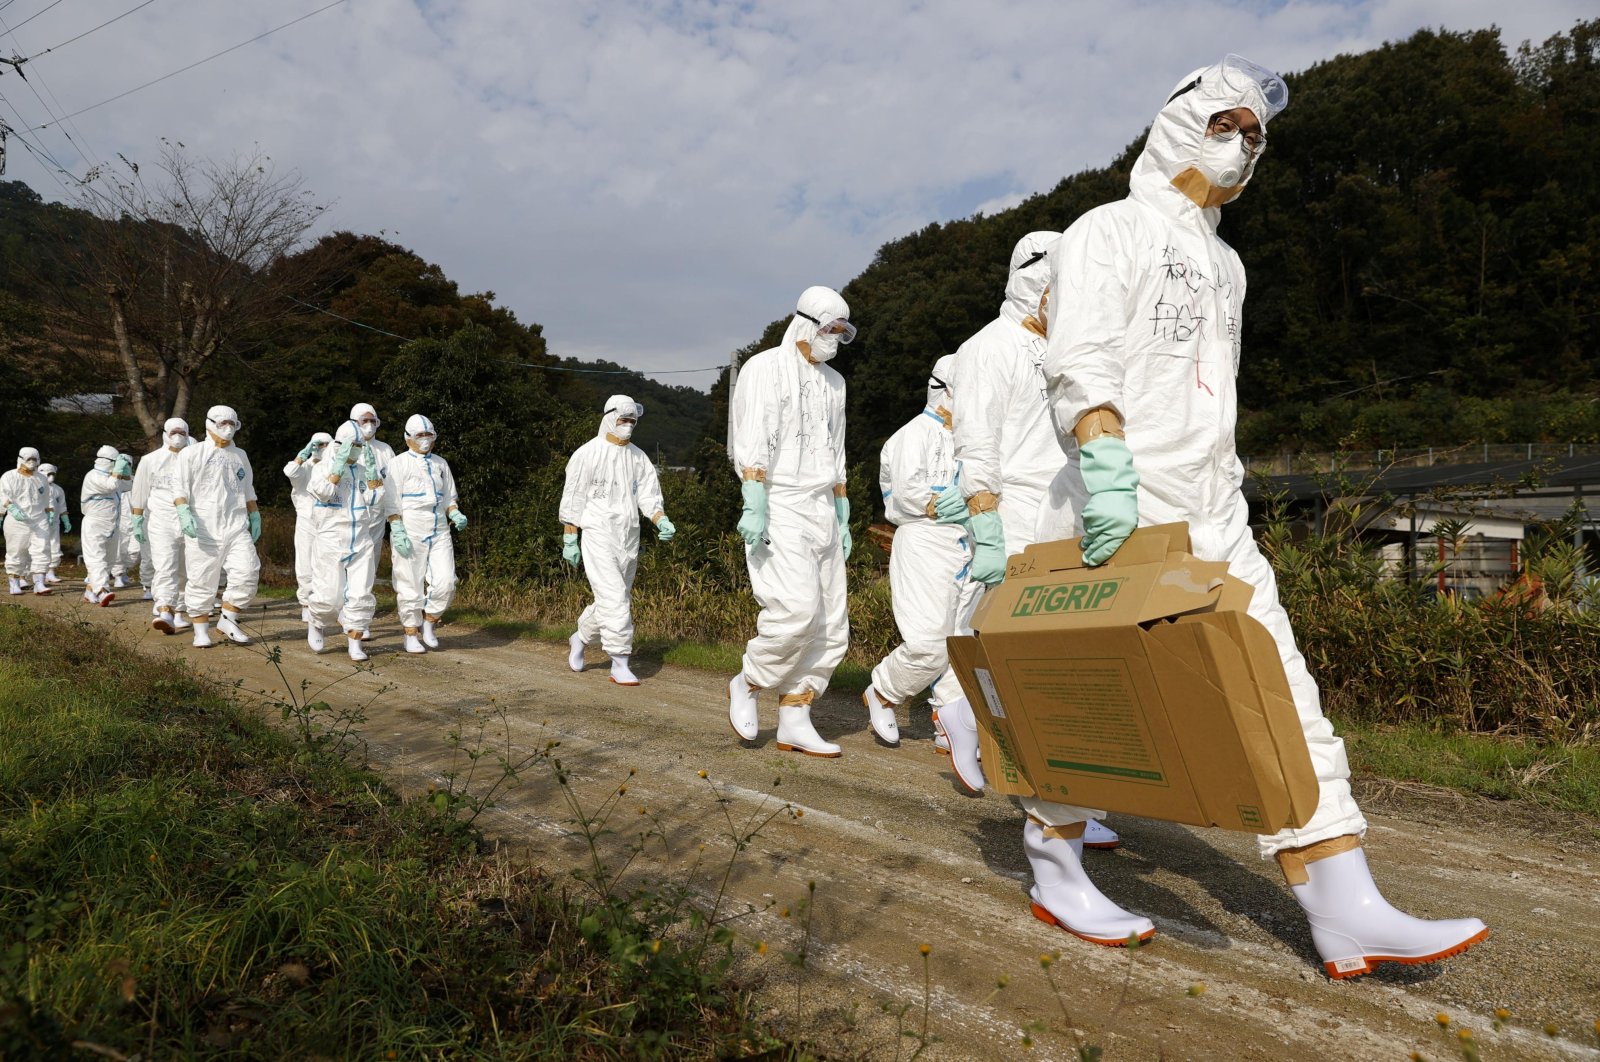 Officials in protective suits head to a poultry farm for a suspected bird flu case in Higashikagawa, western Japan, Nov. 8, 2020. (Kyodo via Reuters)